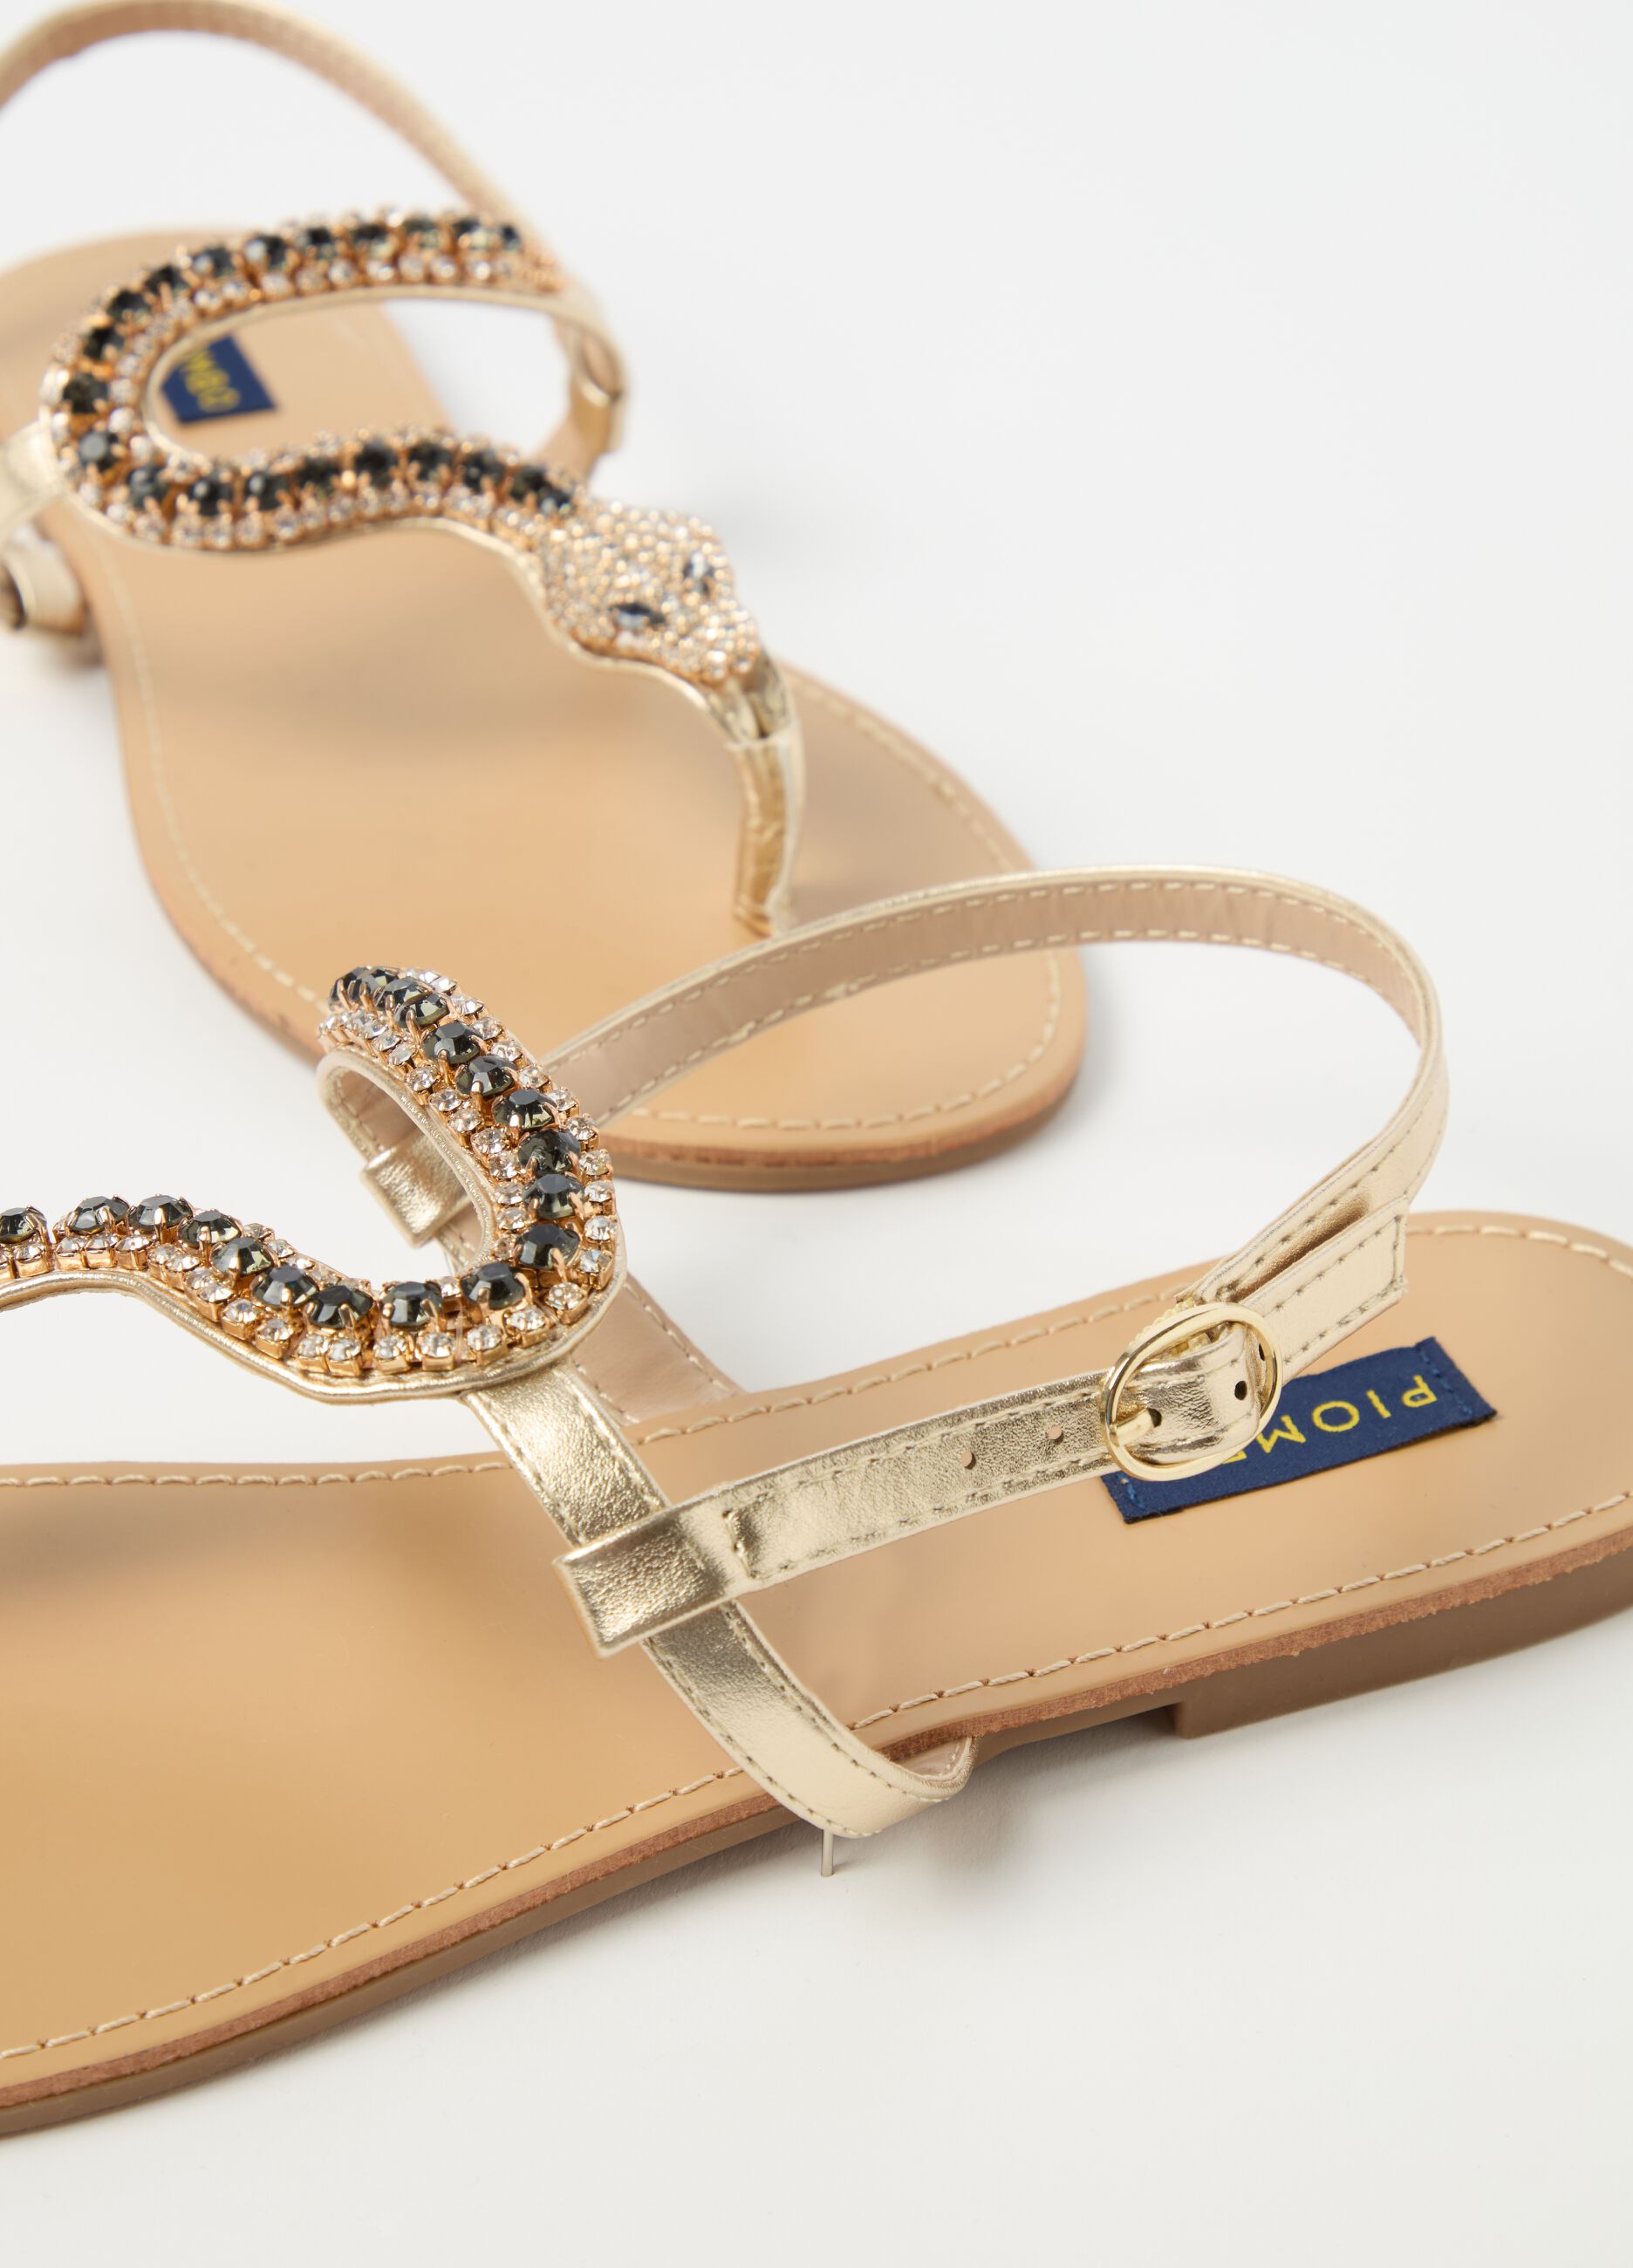 Sandals with stone snake